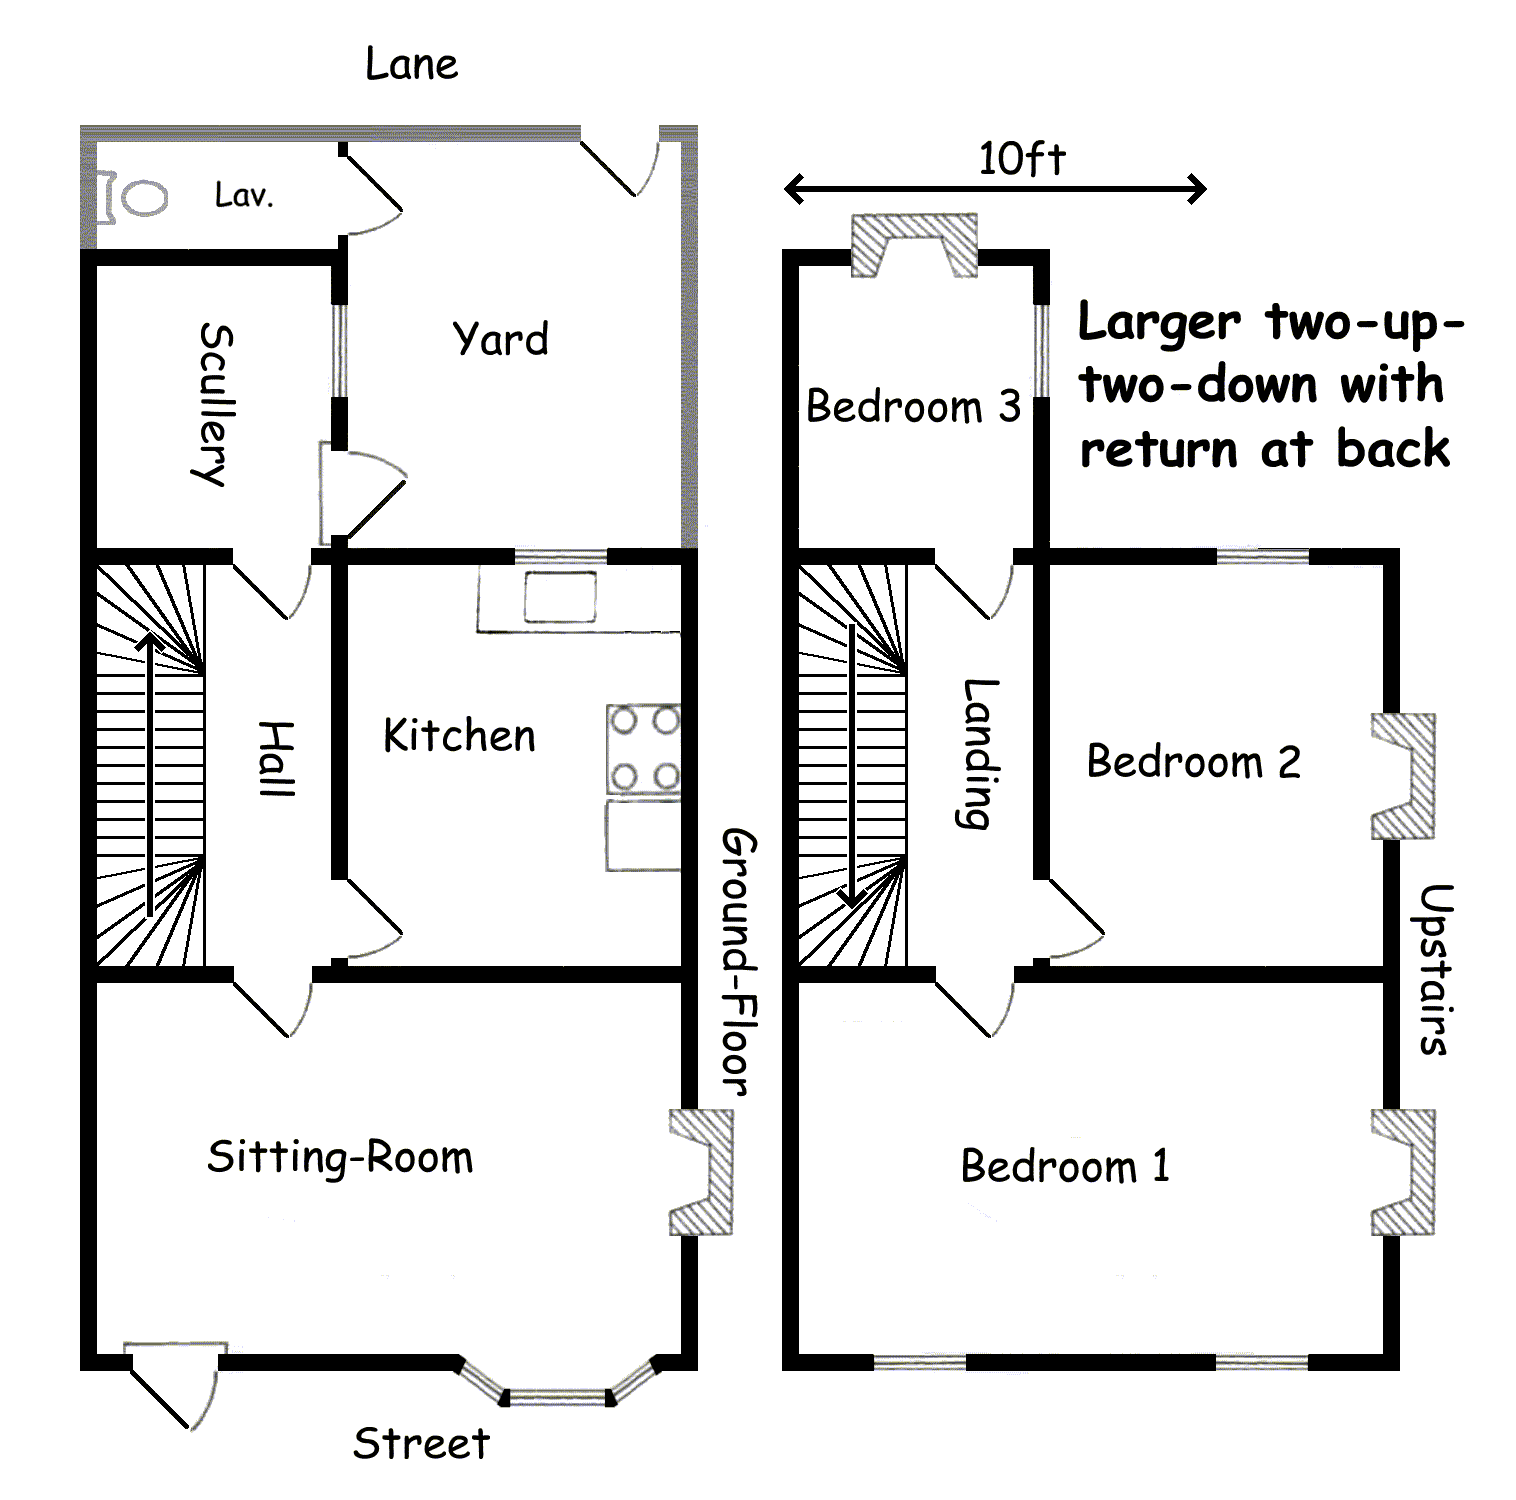 floor-plan of medium-sized house with extension